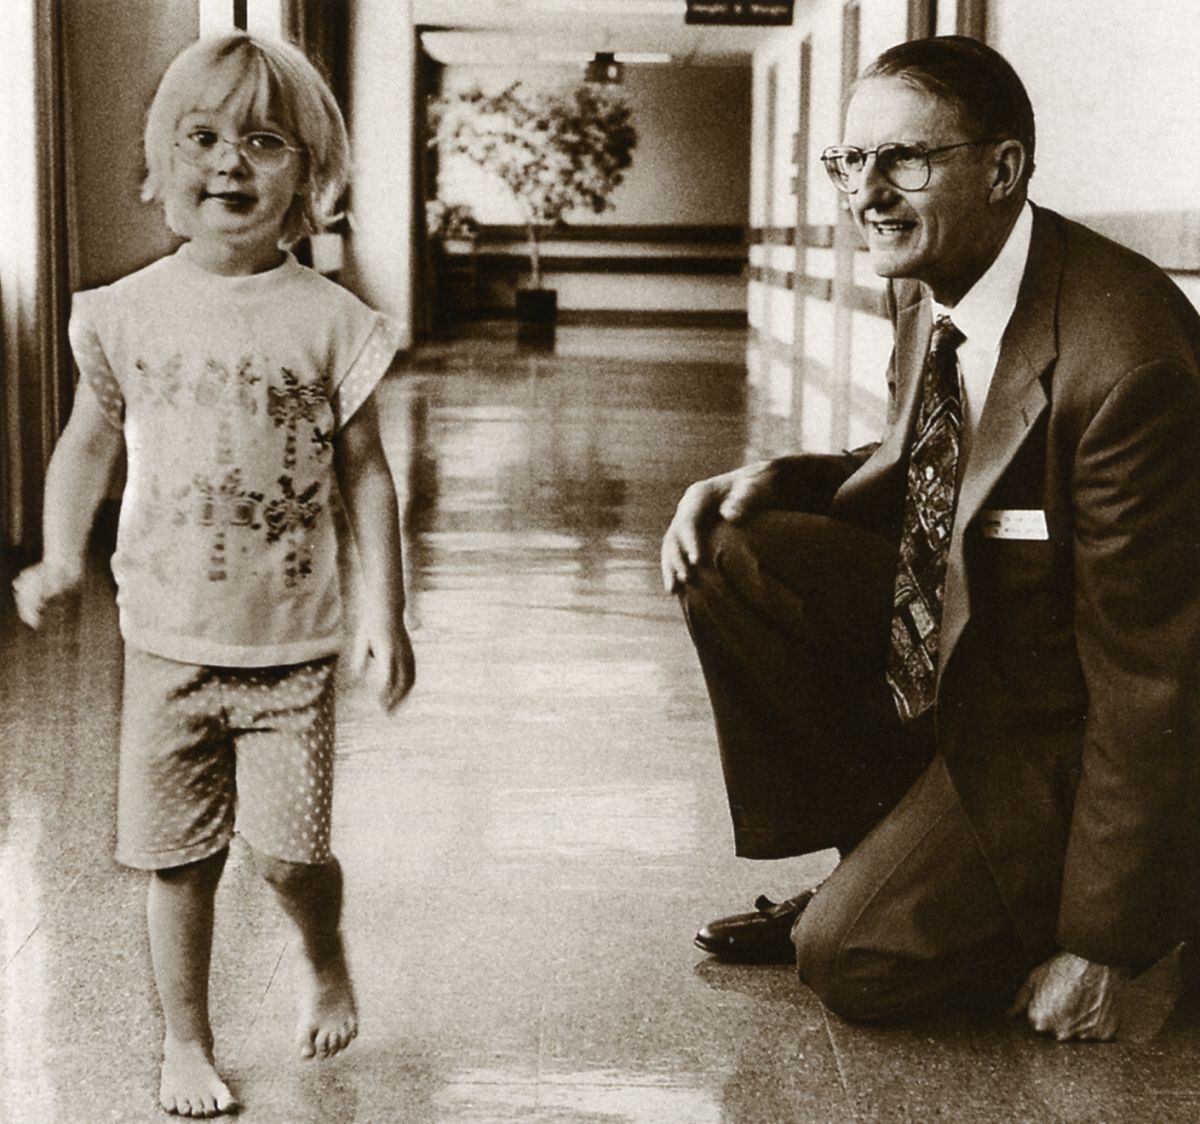 Jim Gage, MD, assesses a young patient's gait. 